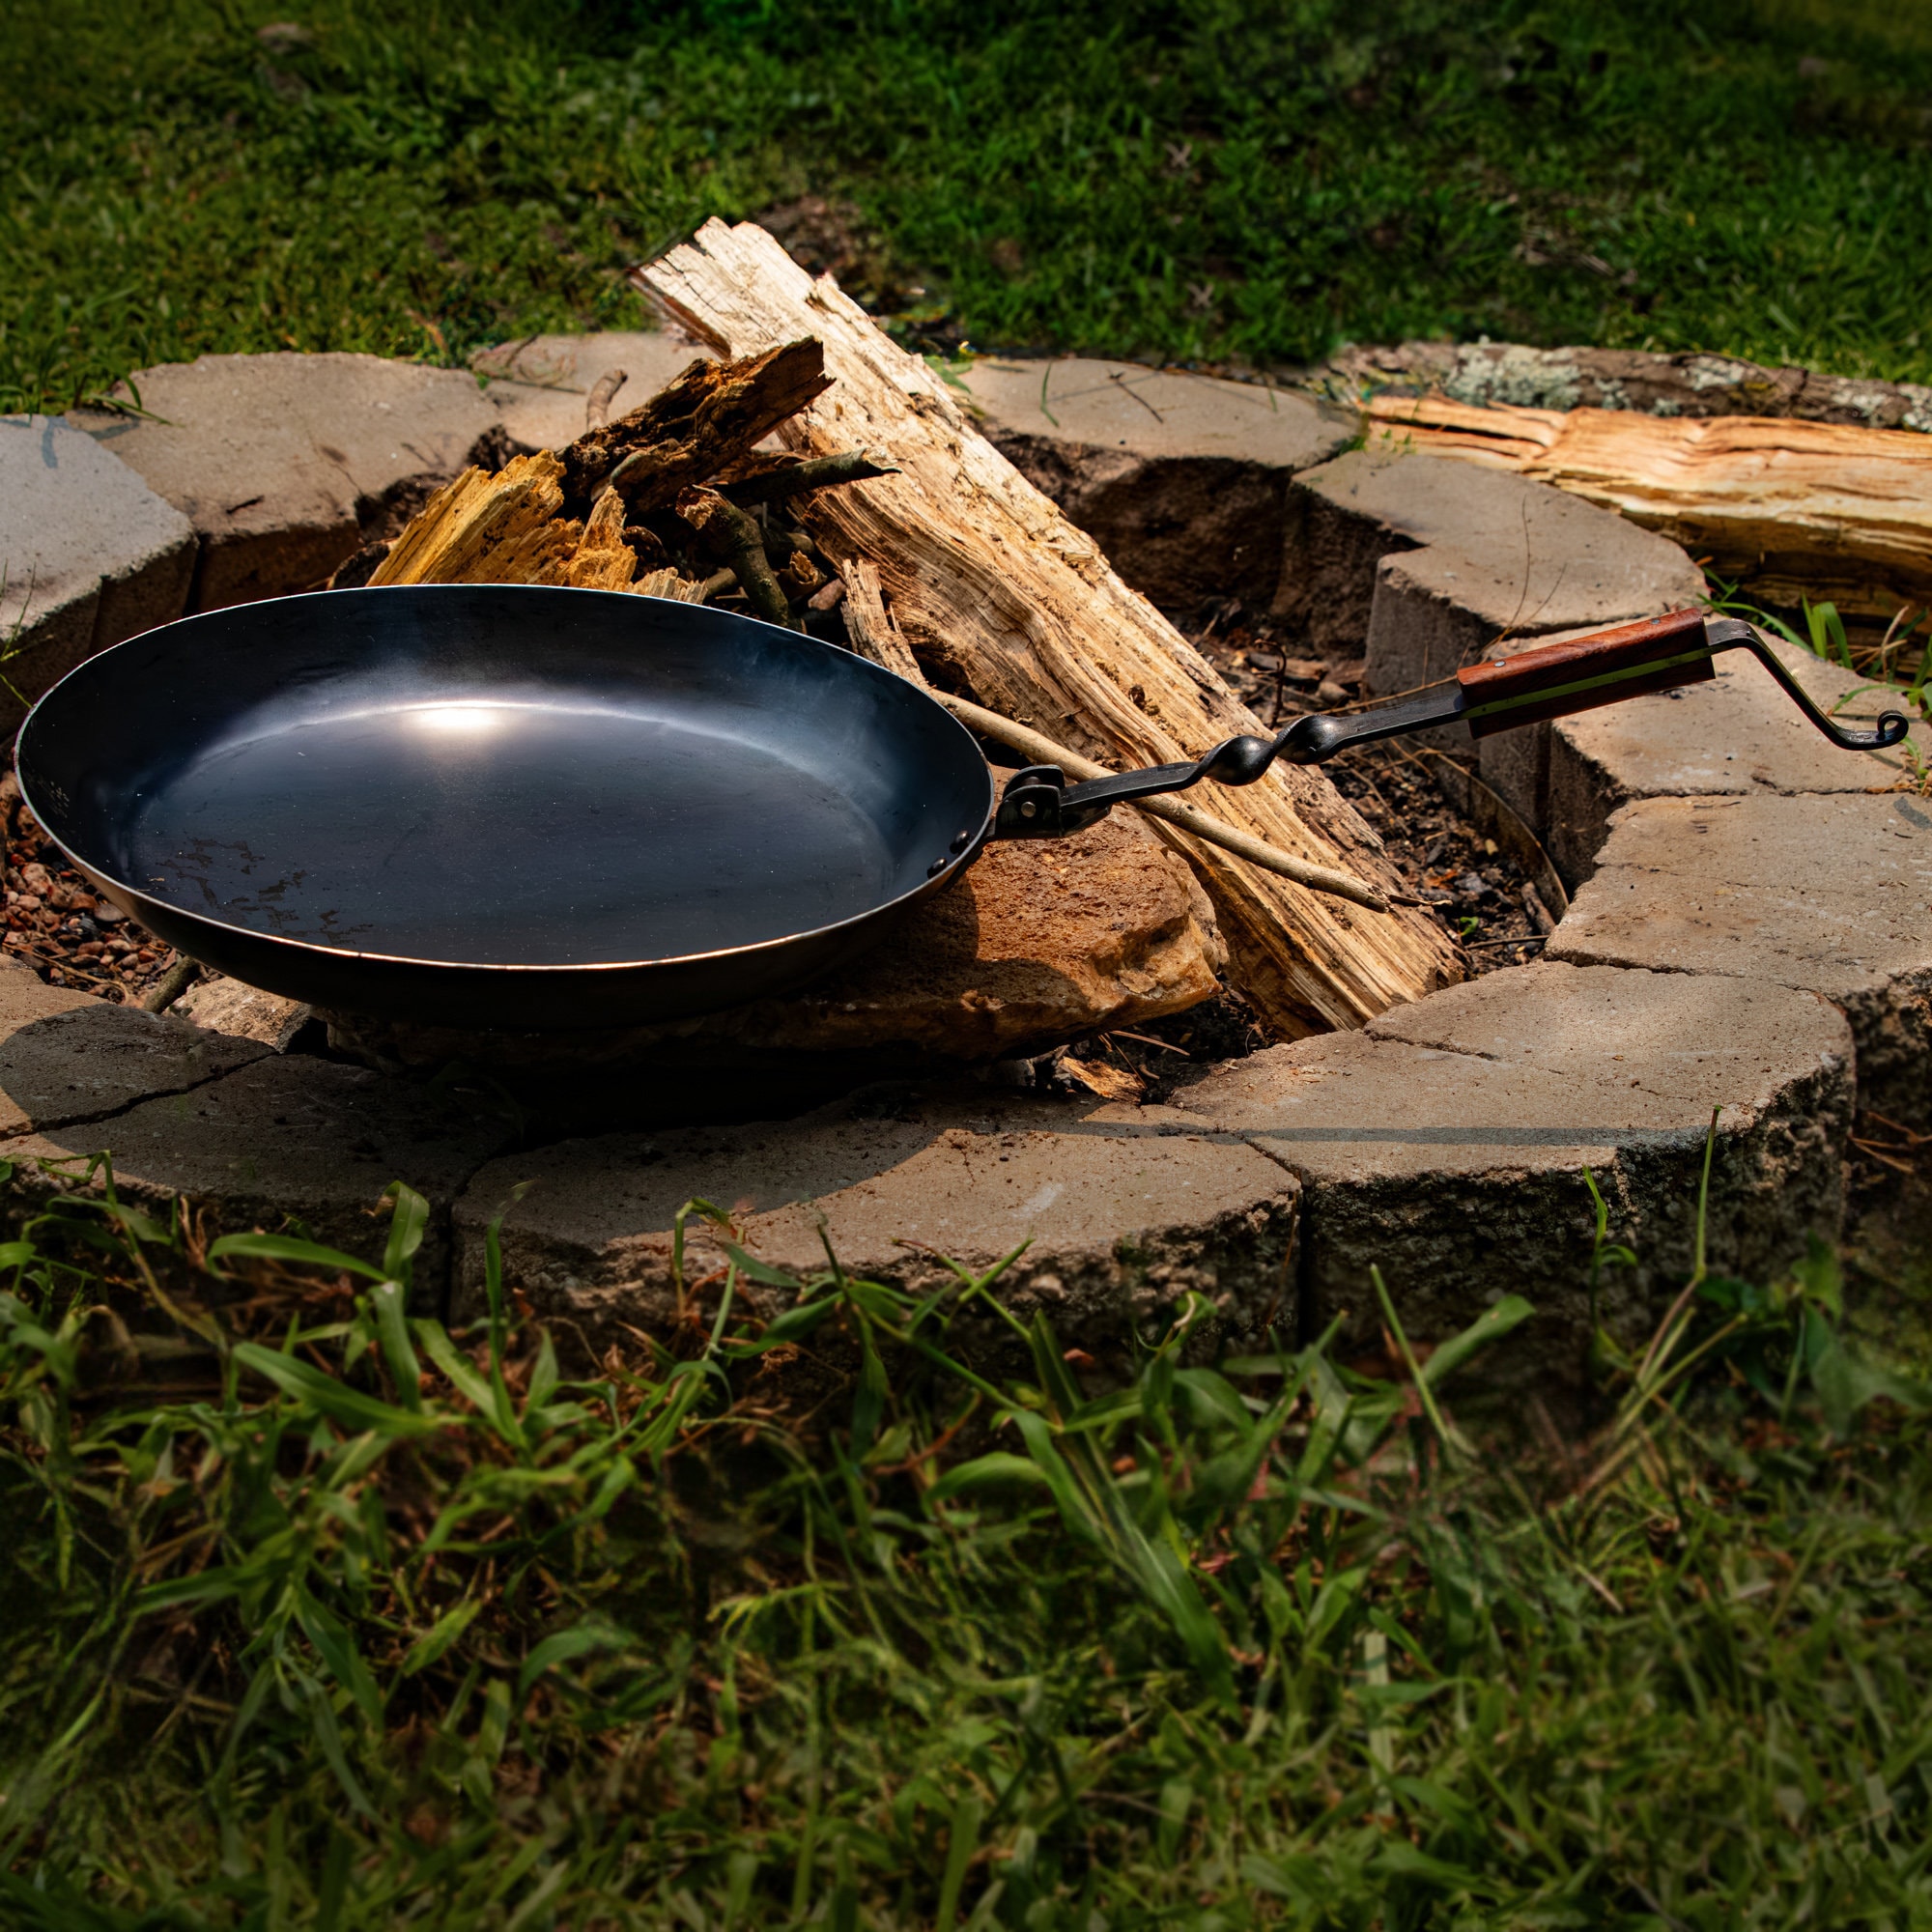 Hand Forged Iron Folding Pan - Portable Camping Accessory - MedieWorld